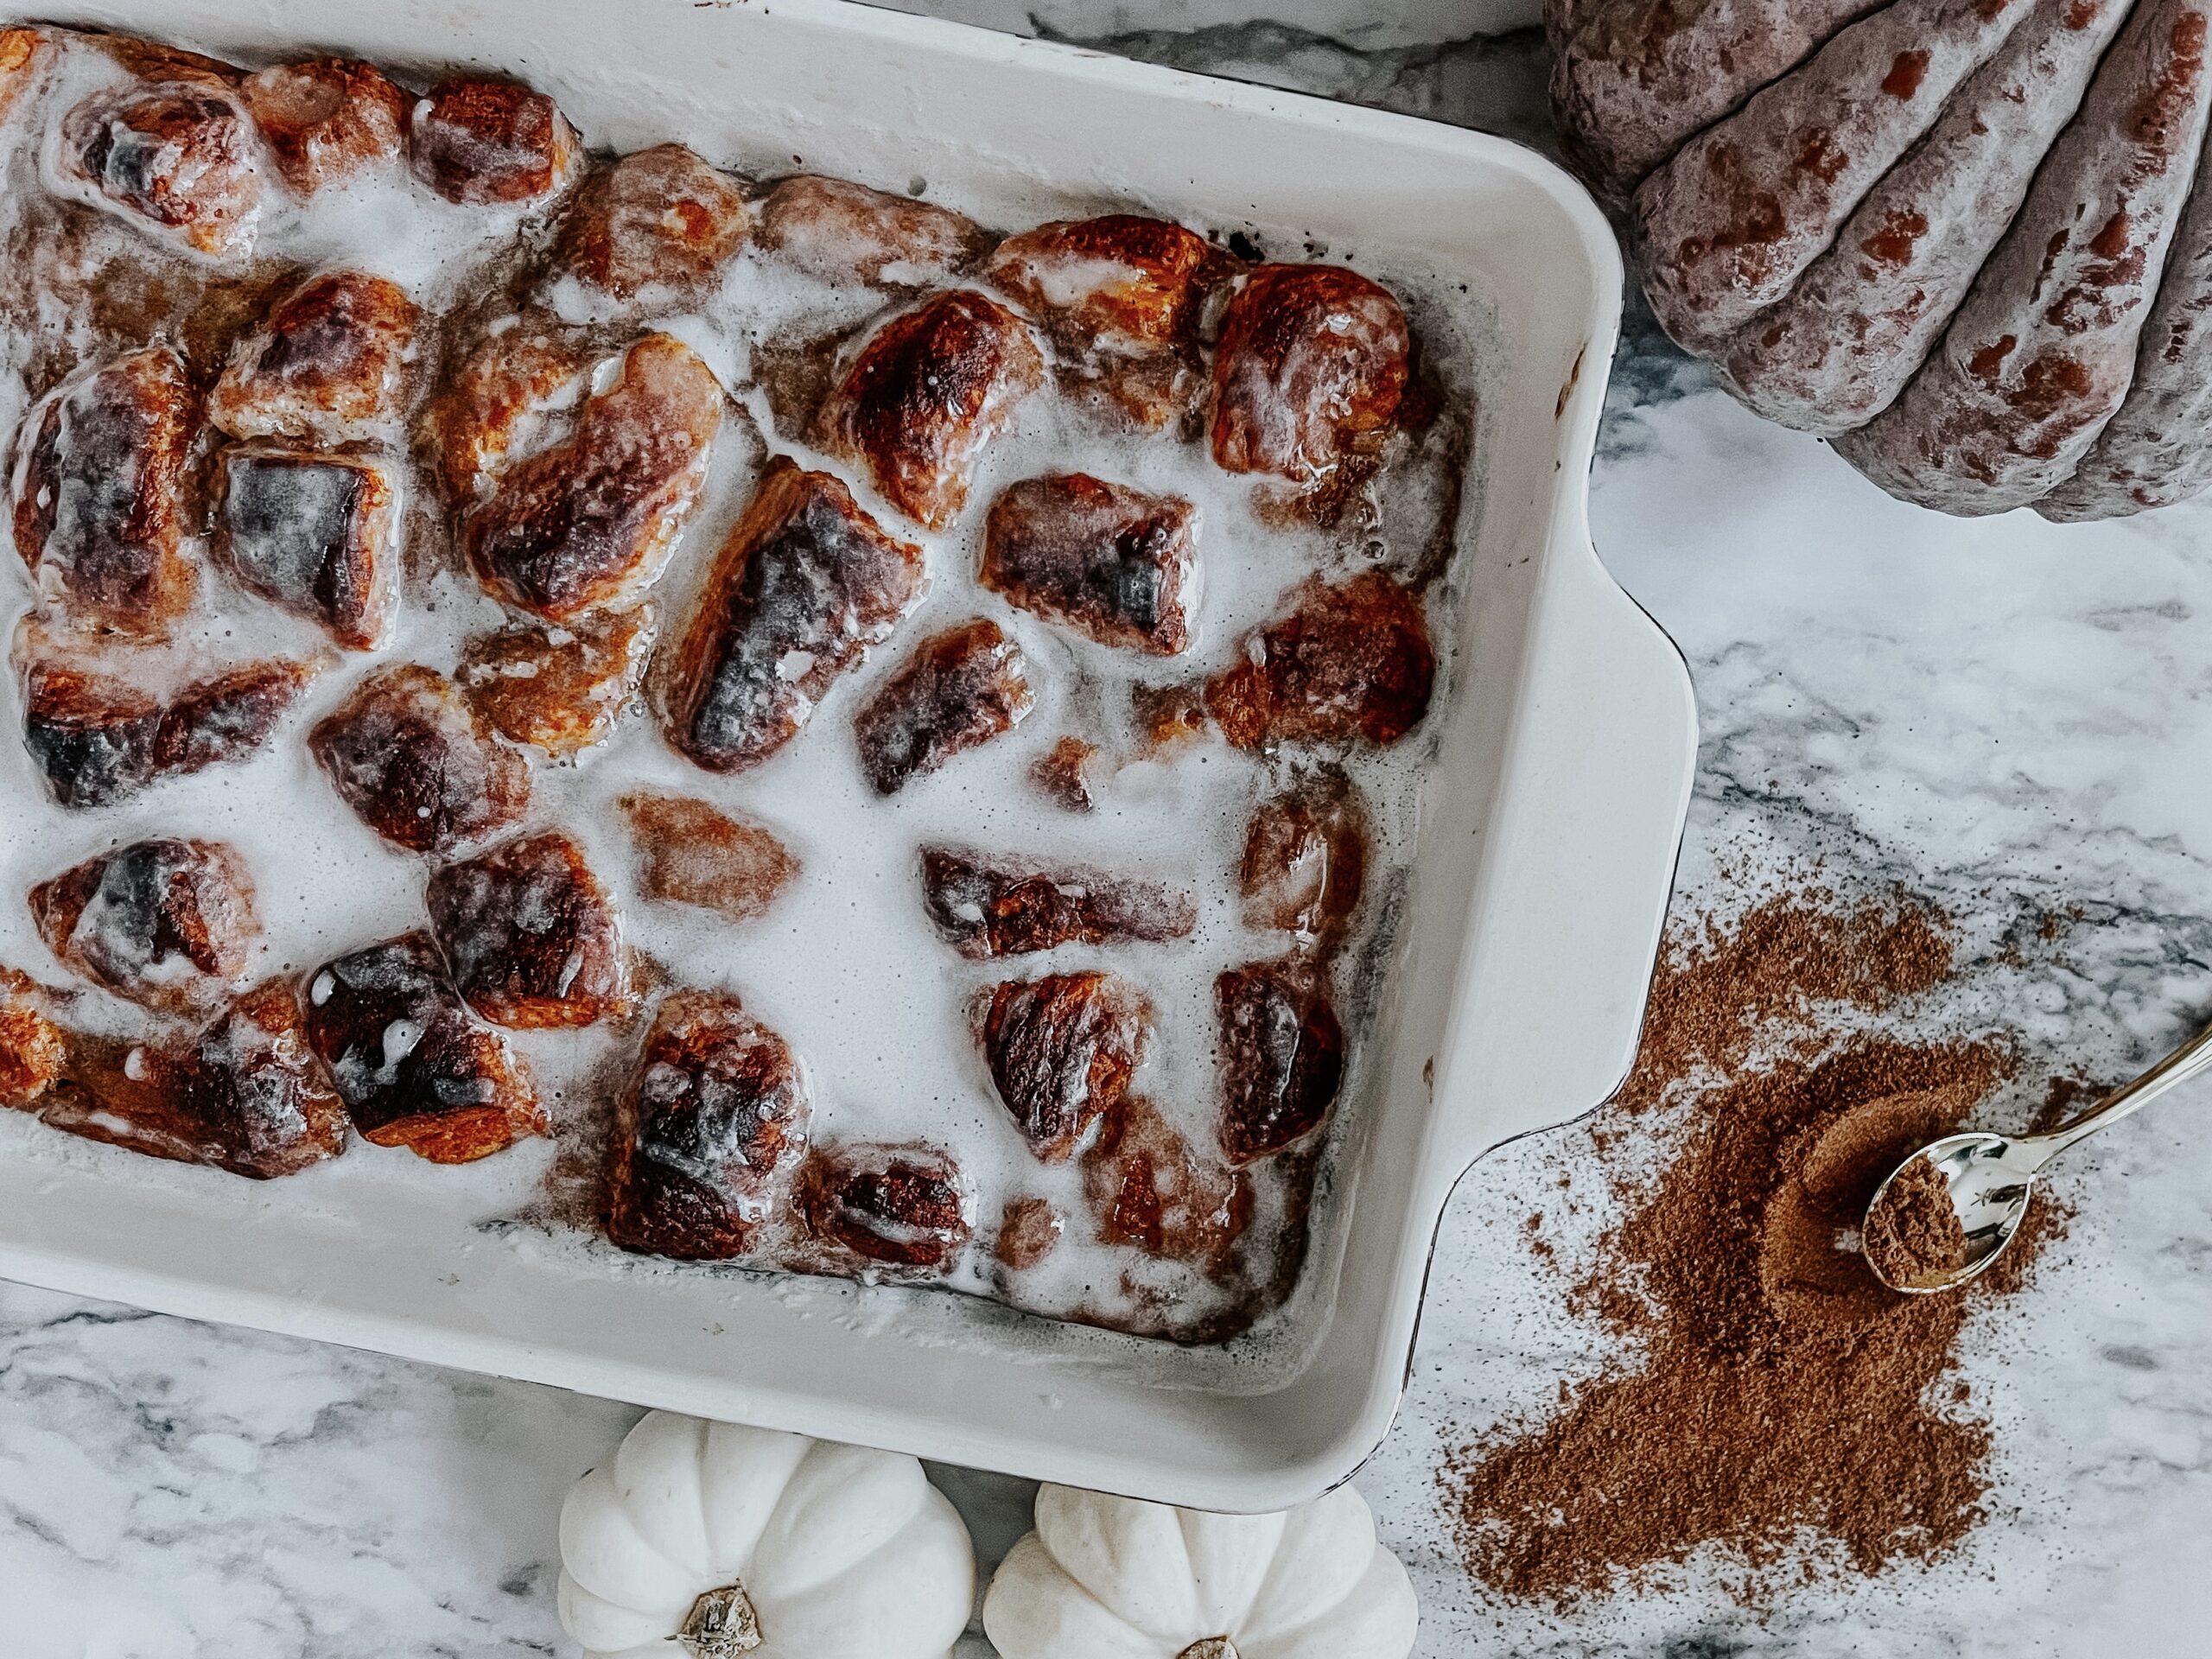 How to make a pumpkin cinnamon roll bake - easy pumpkin cinnamon roll casserole - #fallbreakastidea #fallrecipe - This is our Bliss